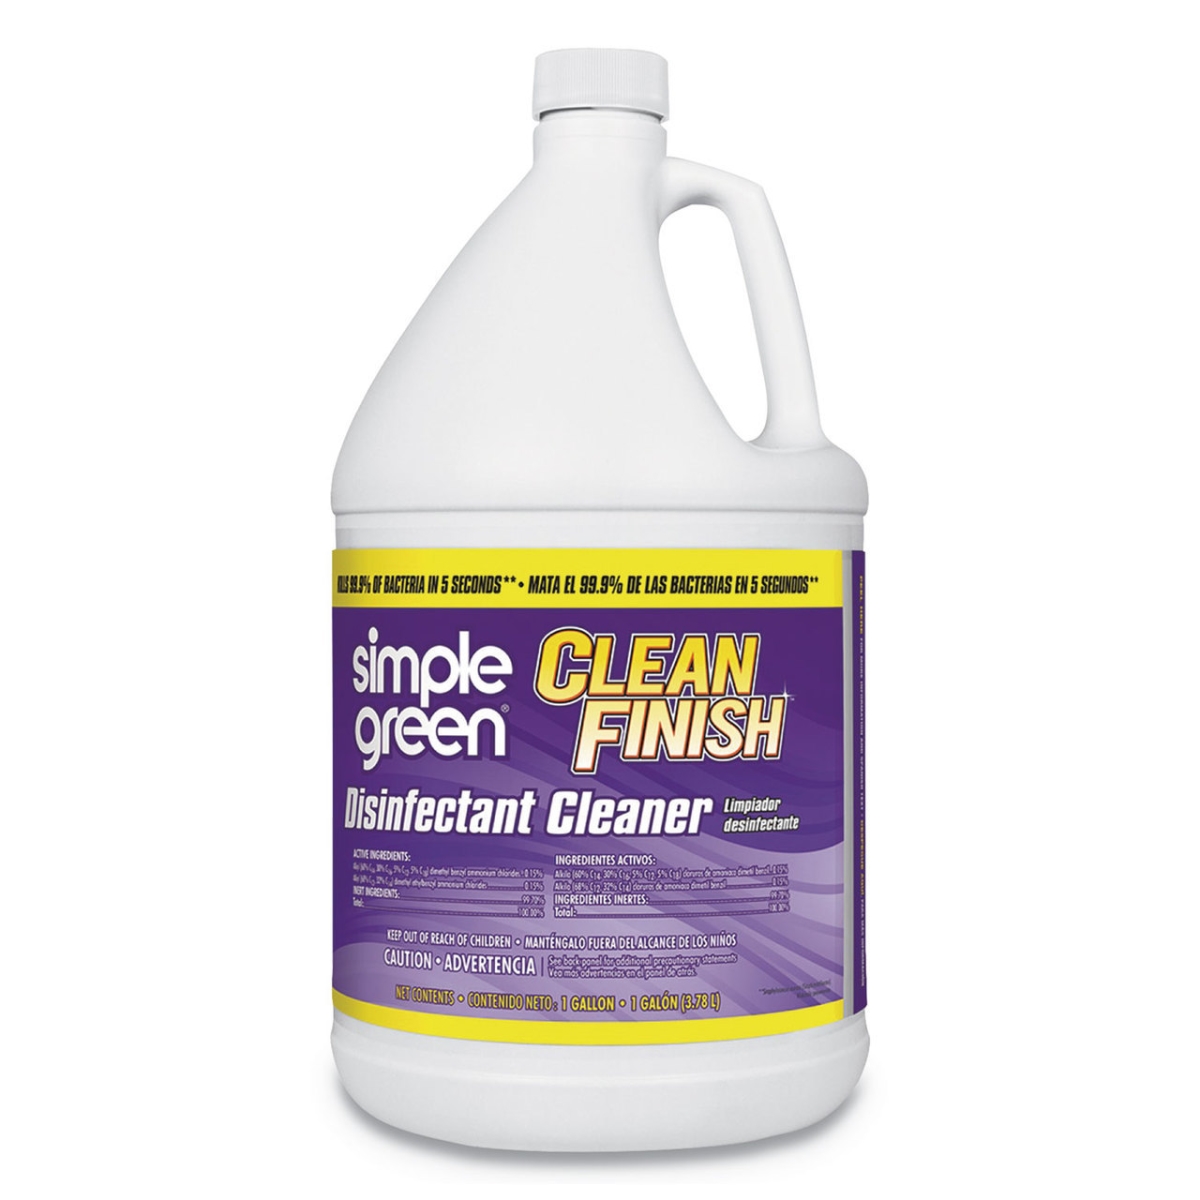 Picture of Sunshine SMP01128 1 gal Clean Finish Disinfectant Cleaner